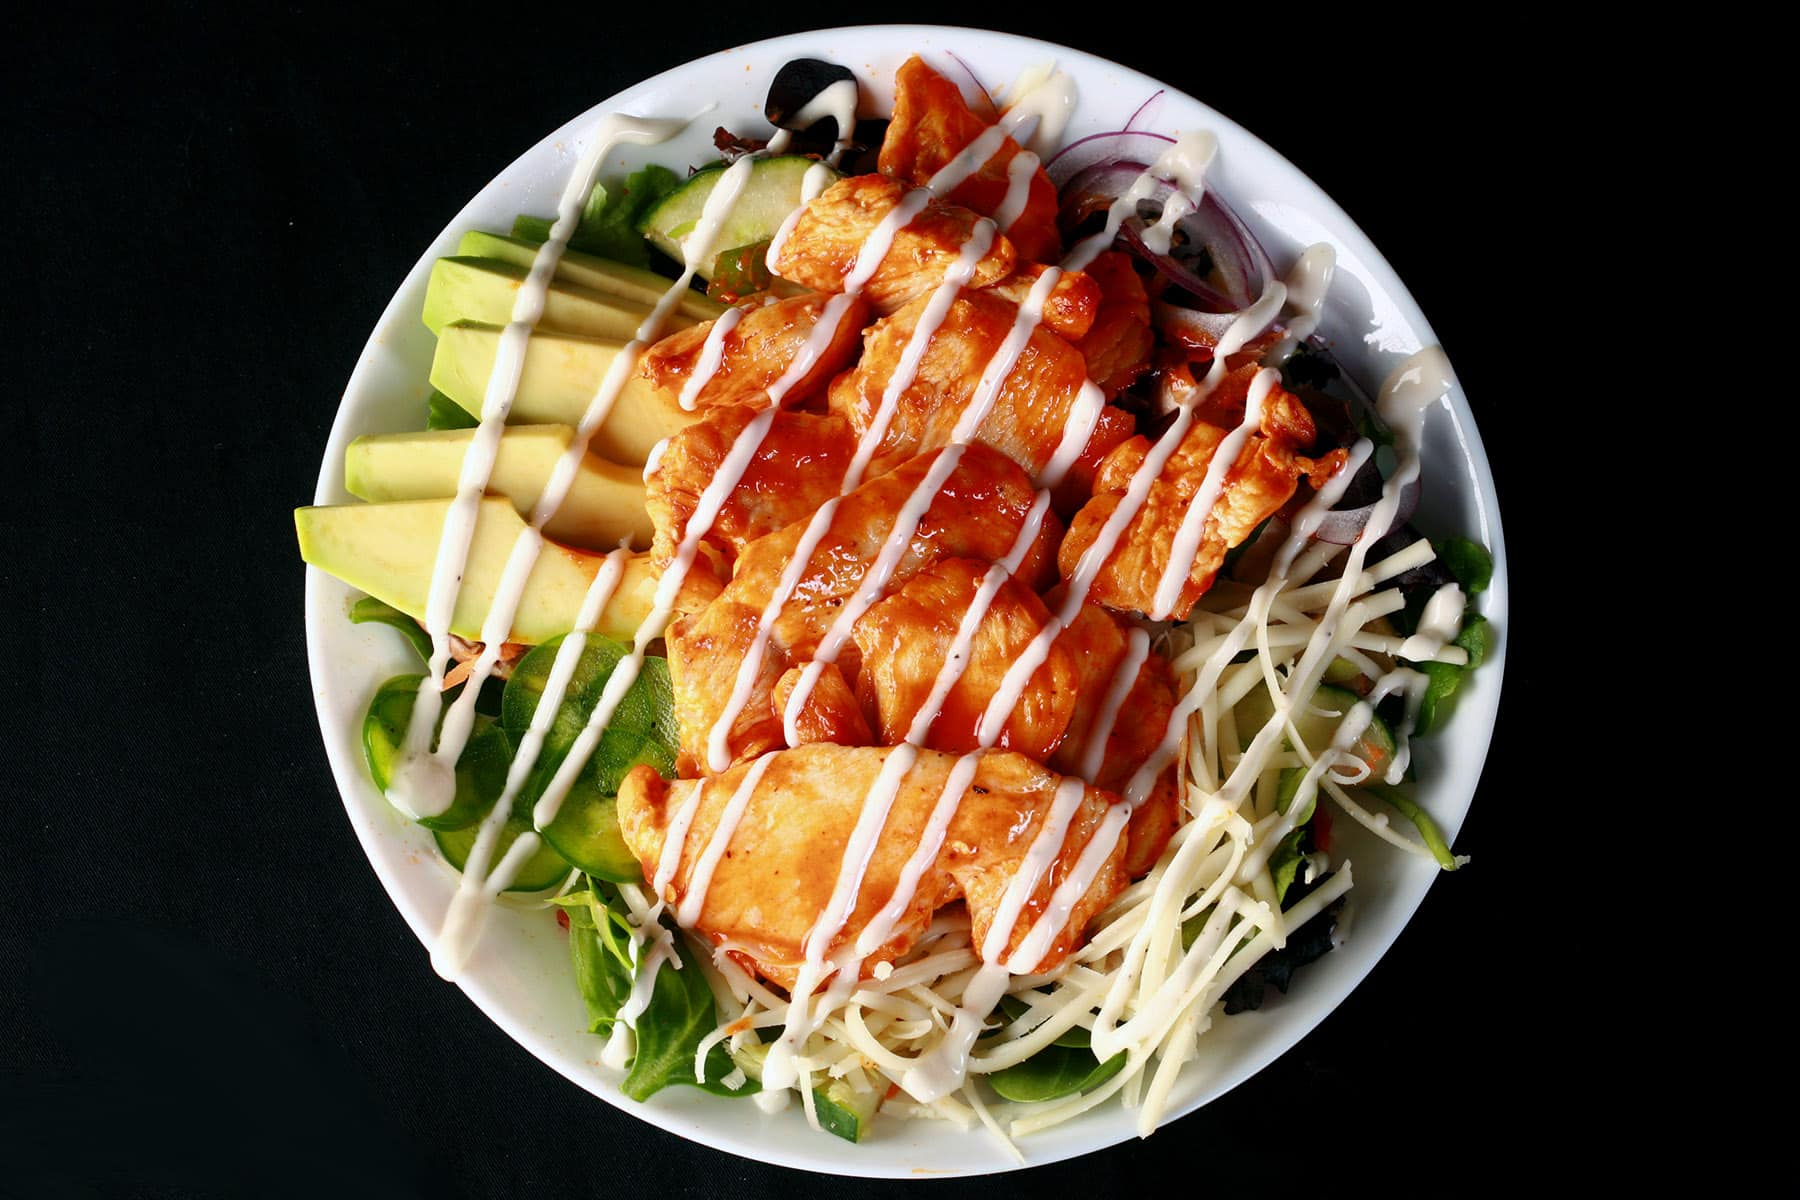 A buffalo chicken salad drizzled with ranch dressing.